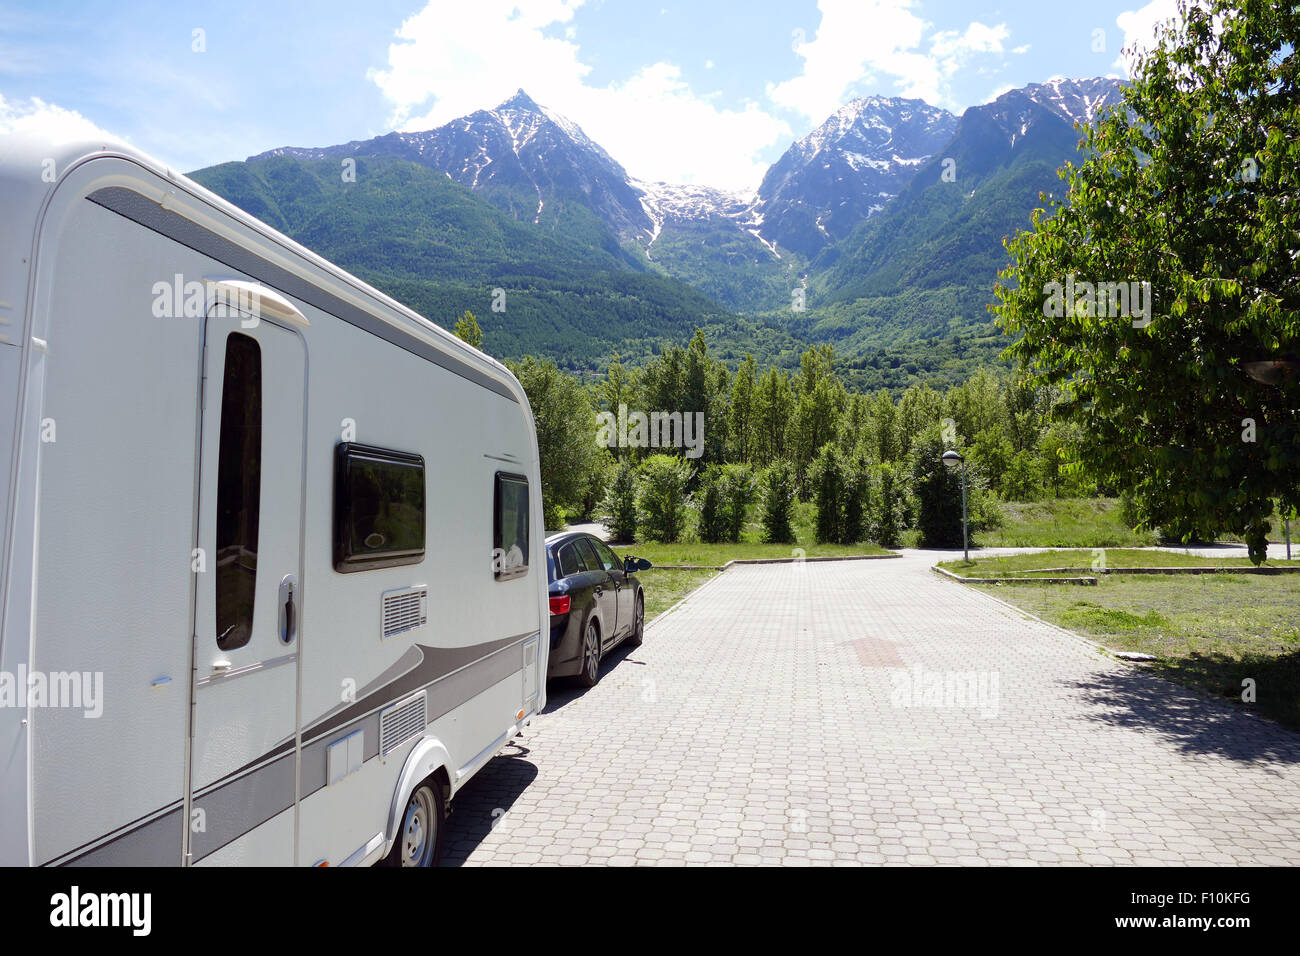 Holiday in the mountains with the caravan Stock Photo